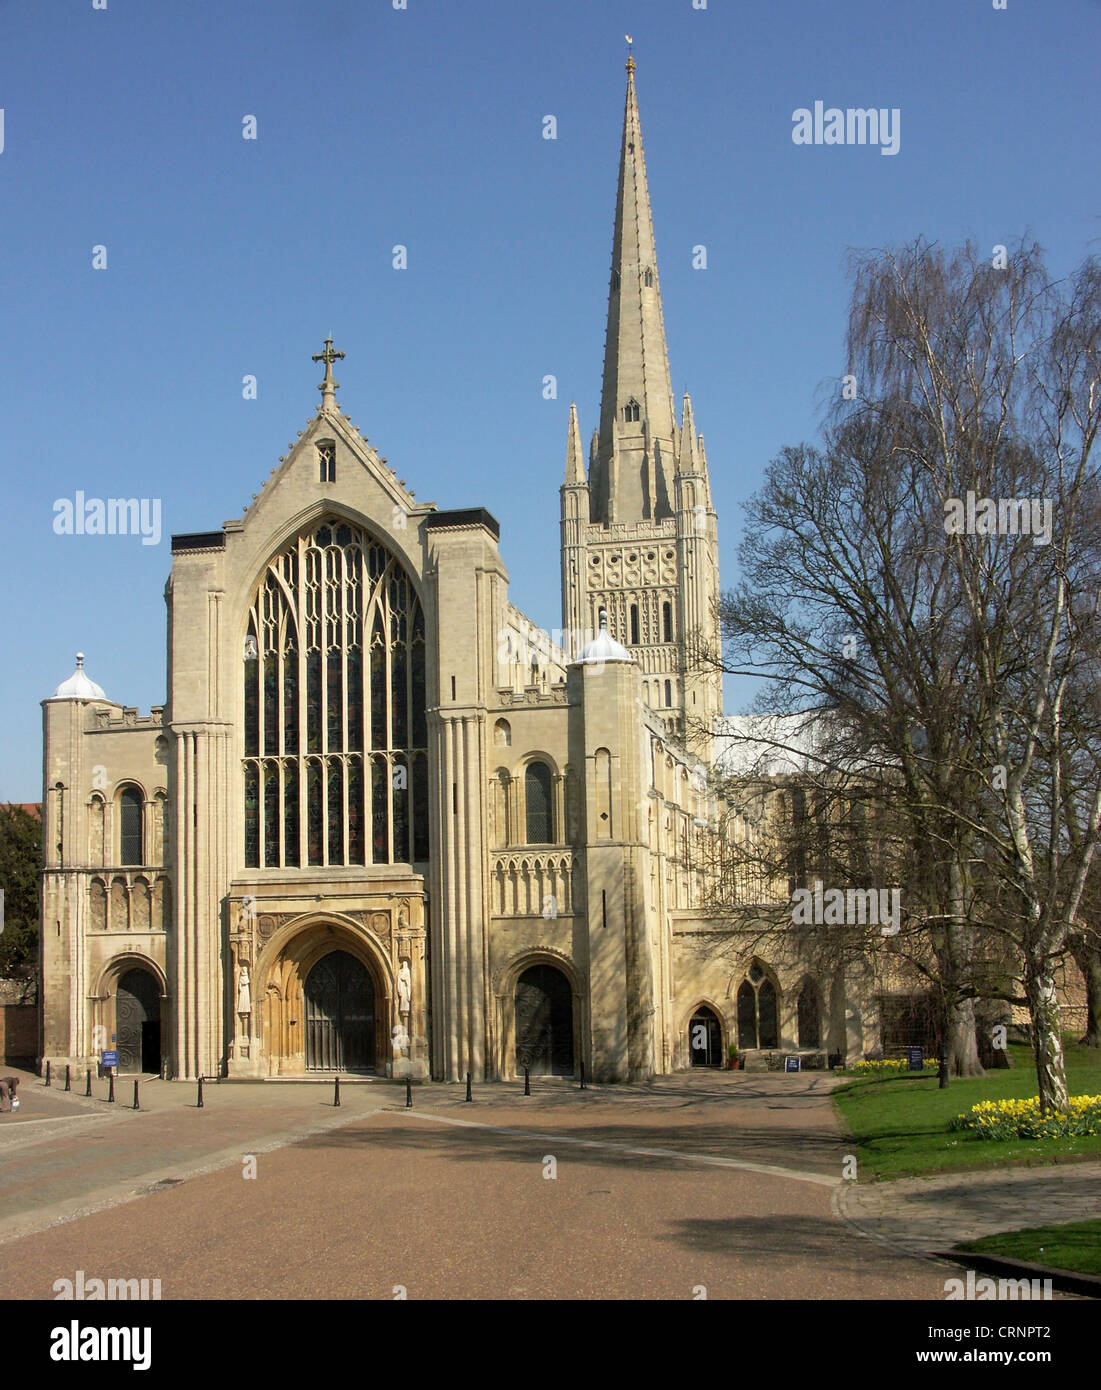 The magnificent Norwich Cathedral boasts the second highest spire in England. Stock Photo